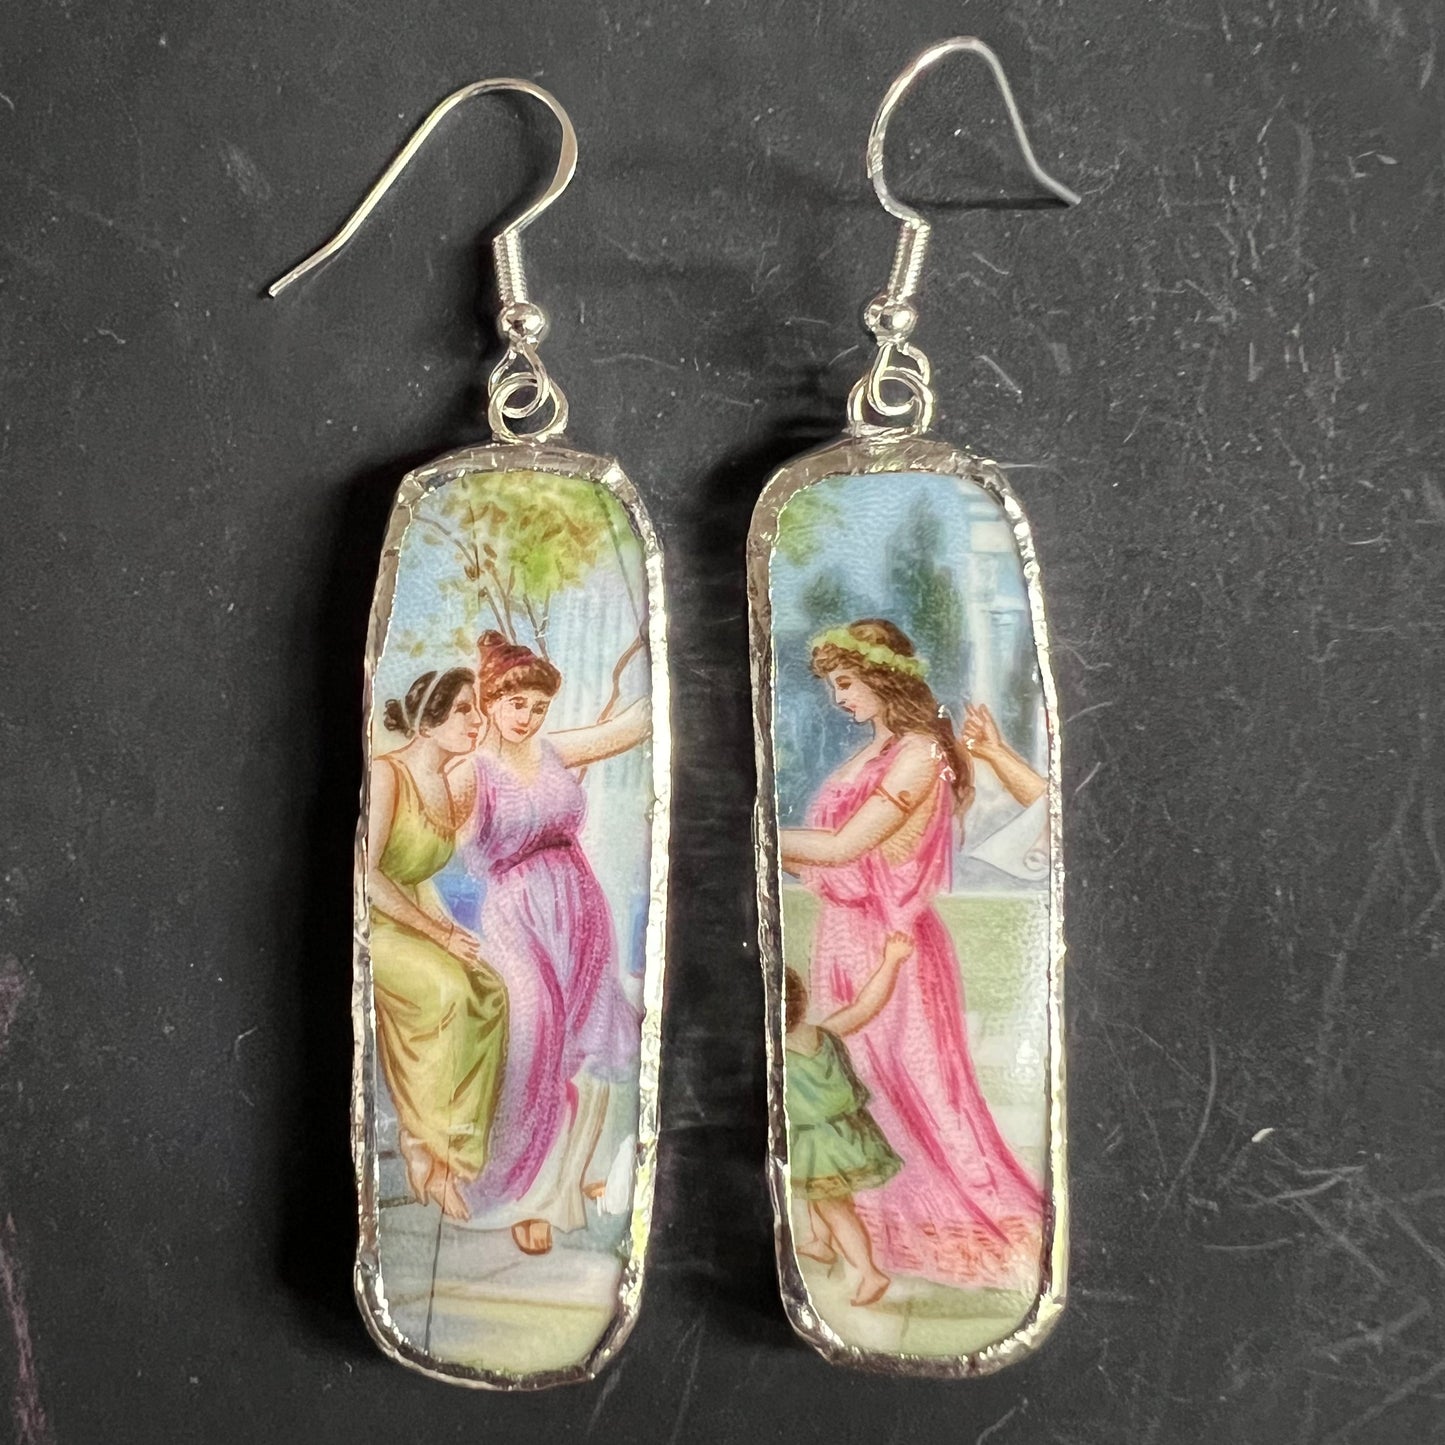 Vintage China Earrings Grecian Maidens